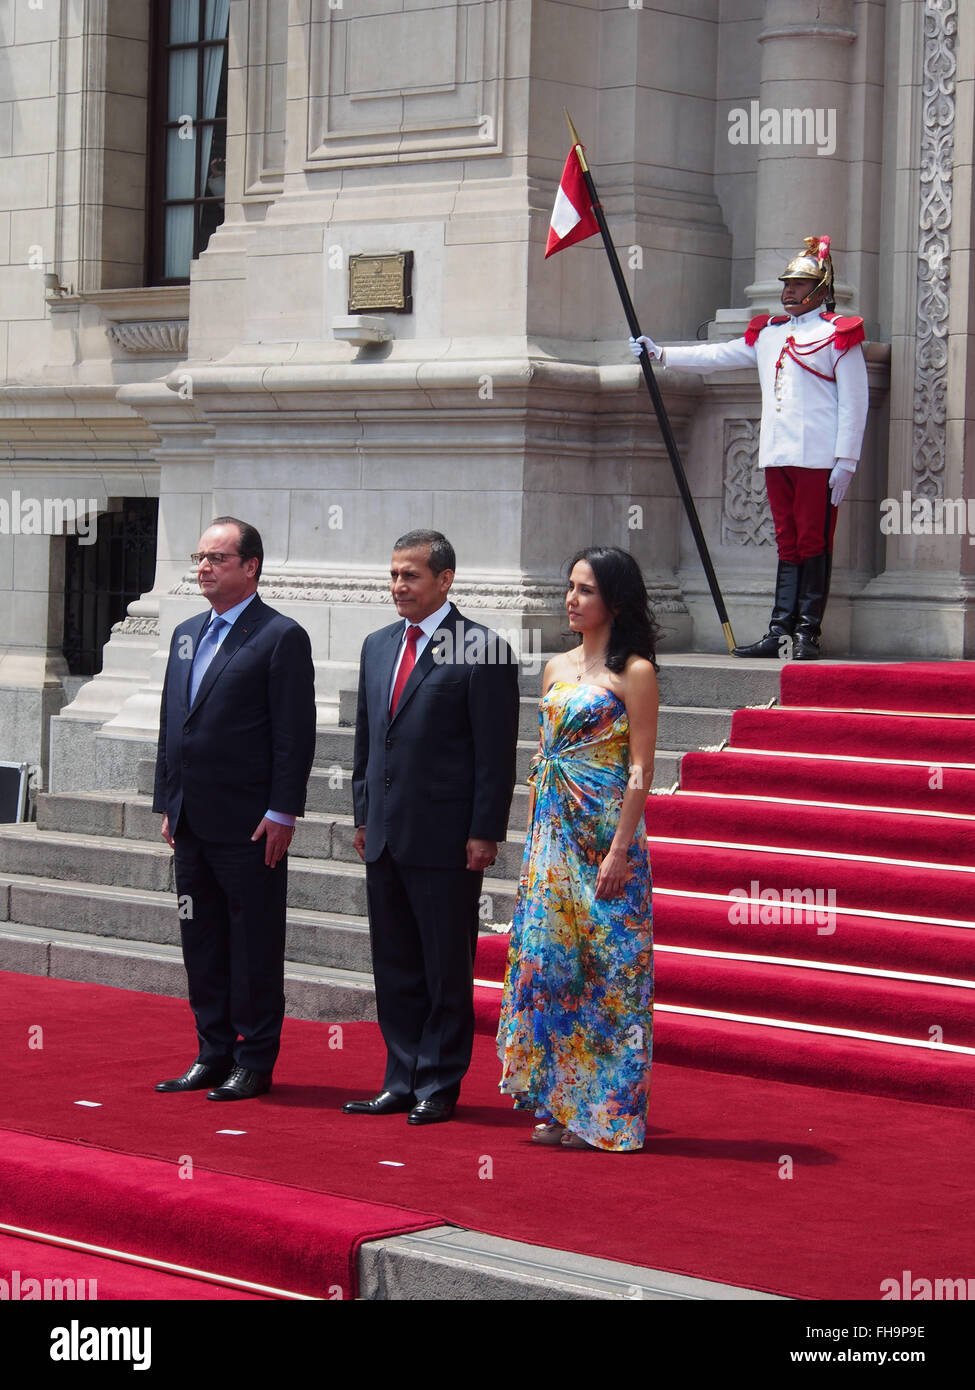 French president Francoise Hollande in official visit to Lima is welcomed by president of Peru Ollanta Humala and his wife Nadine Heredia. (Photo by Carlos Garcia Granthon / Pacific Press) Stock Photo